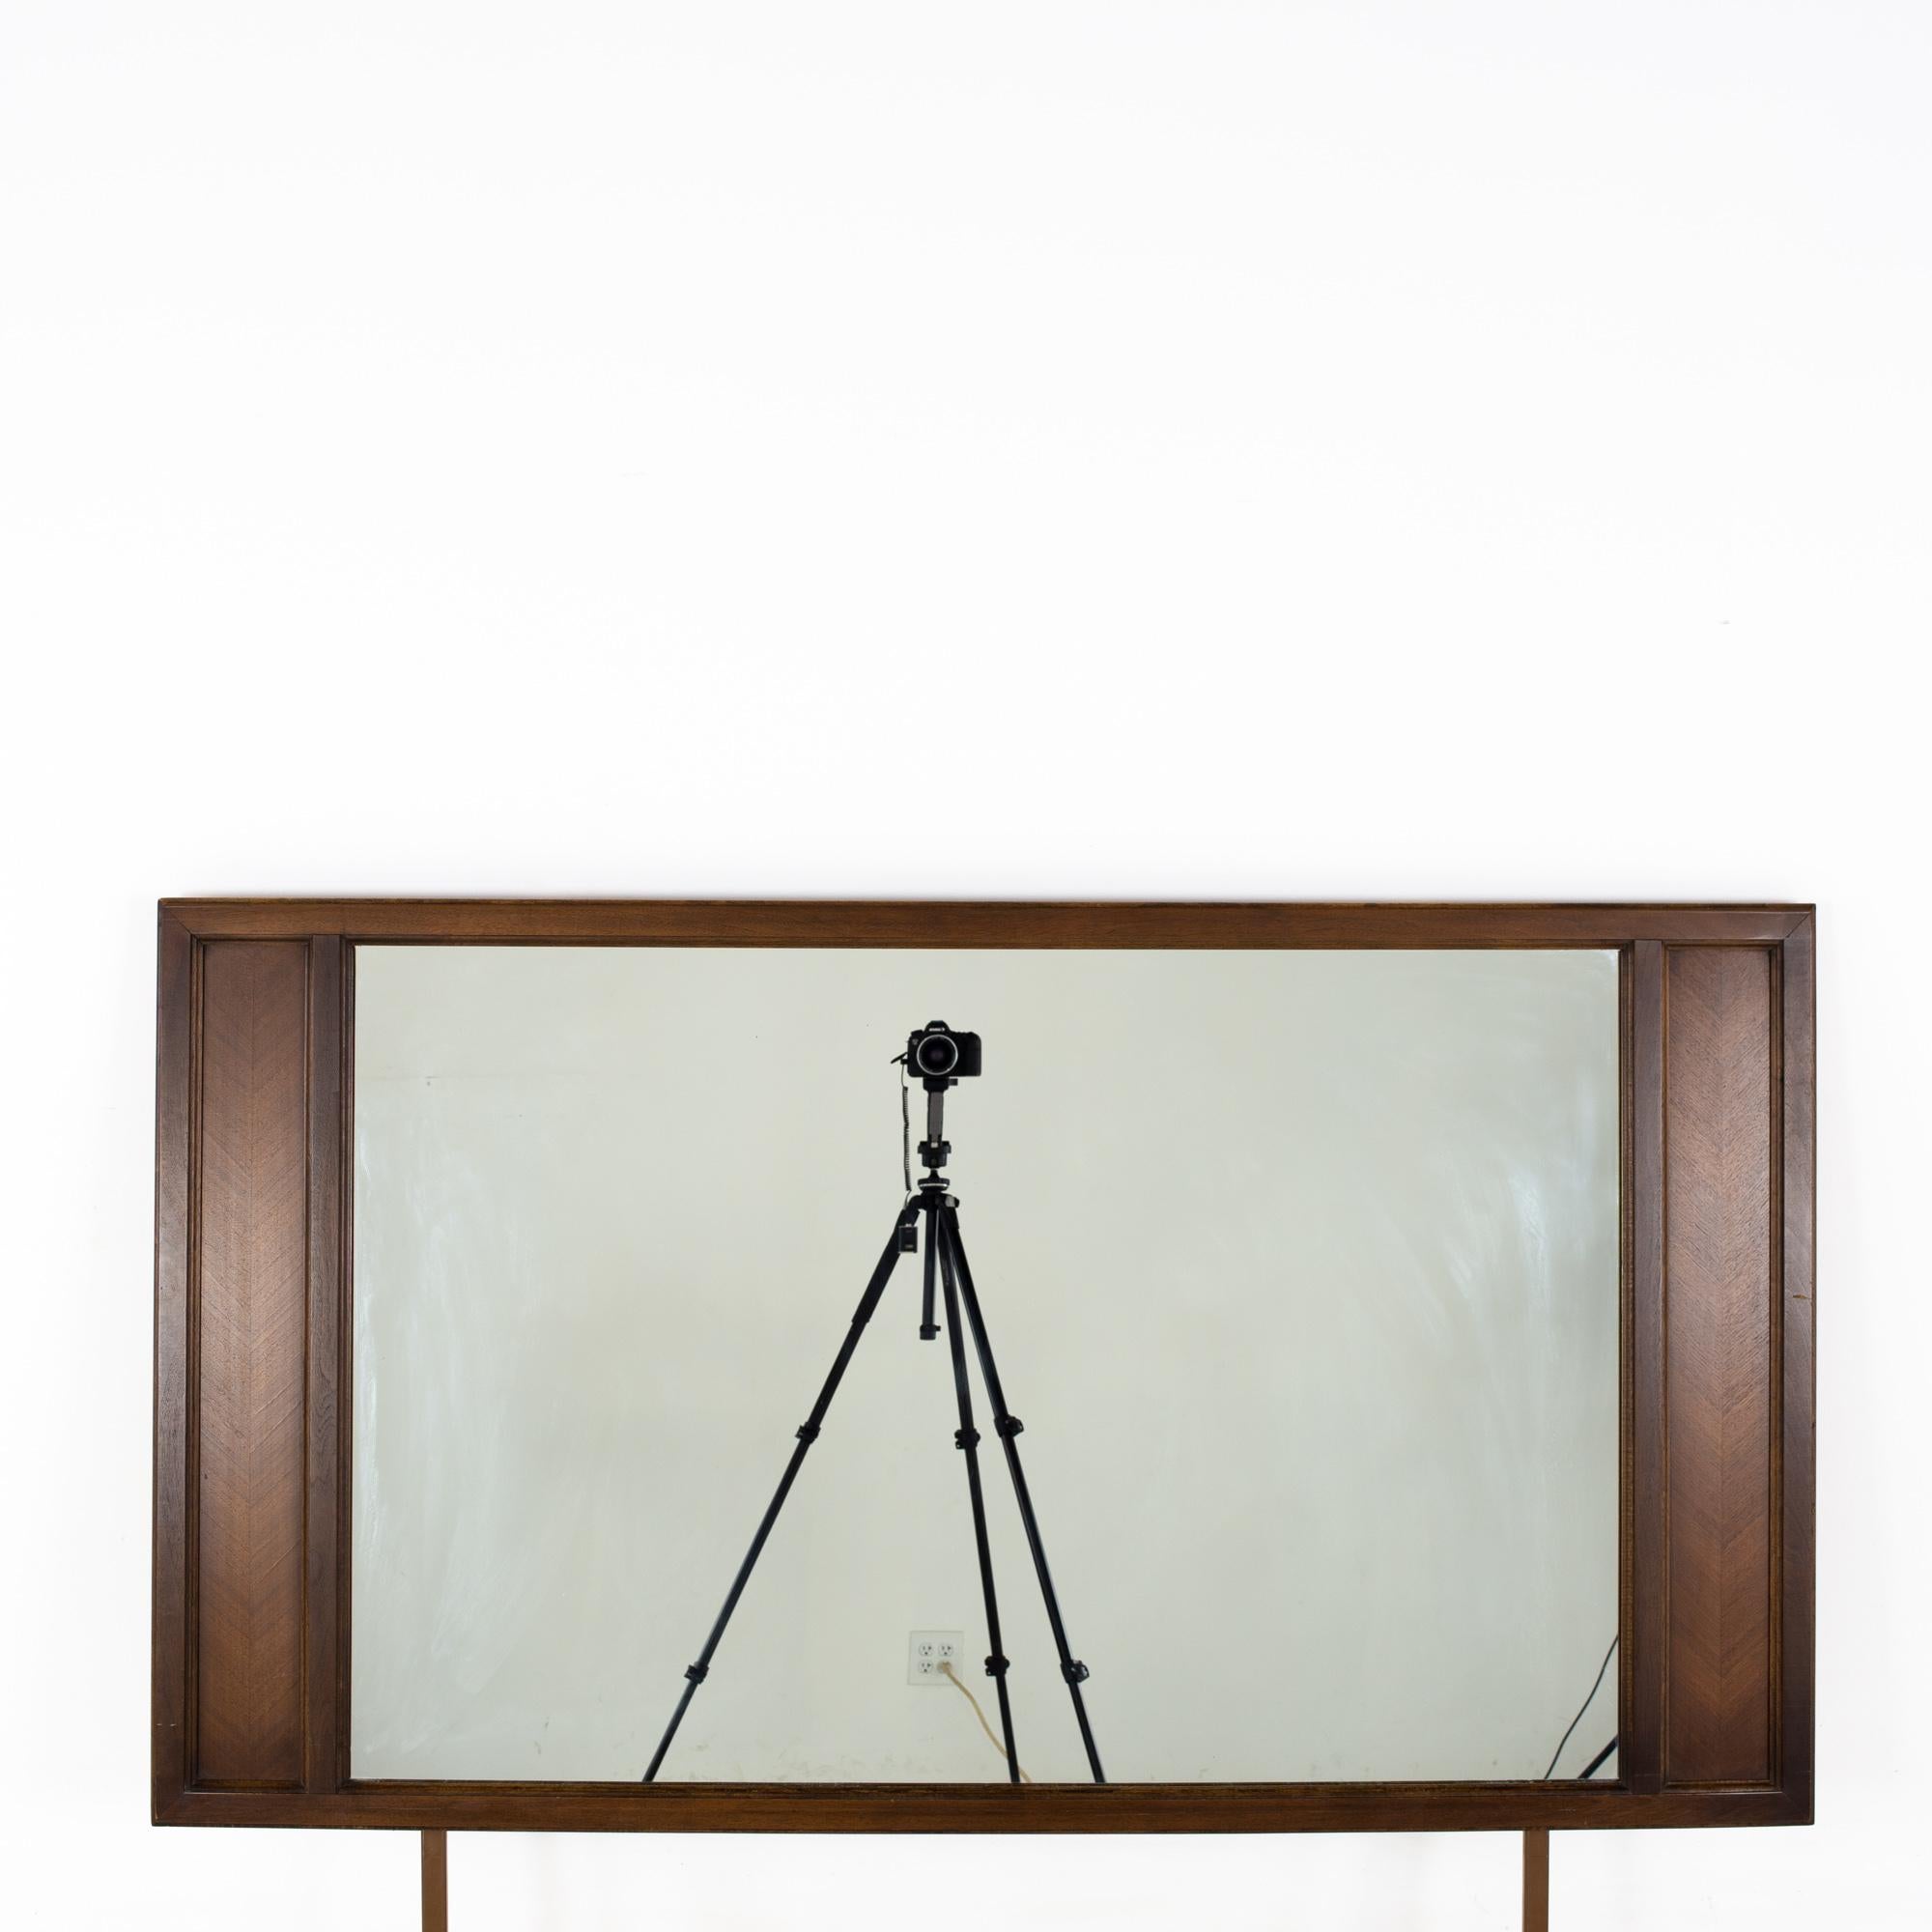 American of Martinsville Mid Century Harlequin Walnut Mirror
Mirror measures: 61 wide x 1 deep x 48 inches high

All pieces of furniture can be had in what we call restored vintage condition. That means the piece is restored upon purchase so it’s